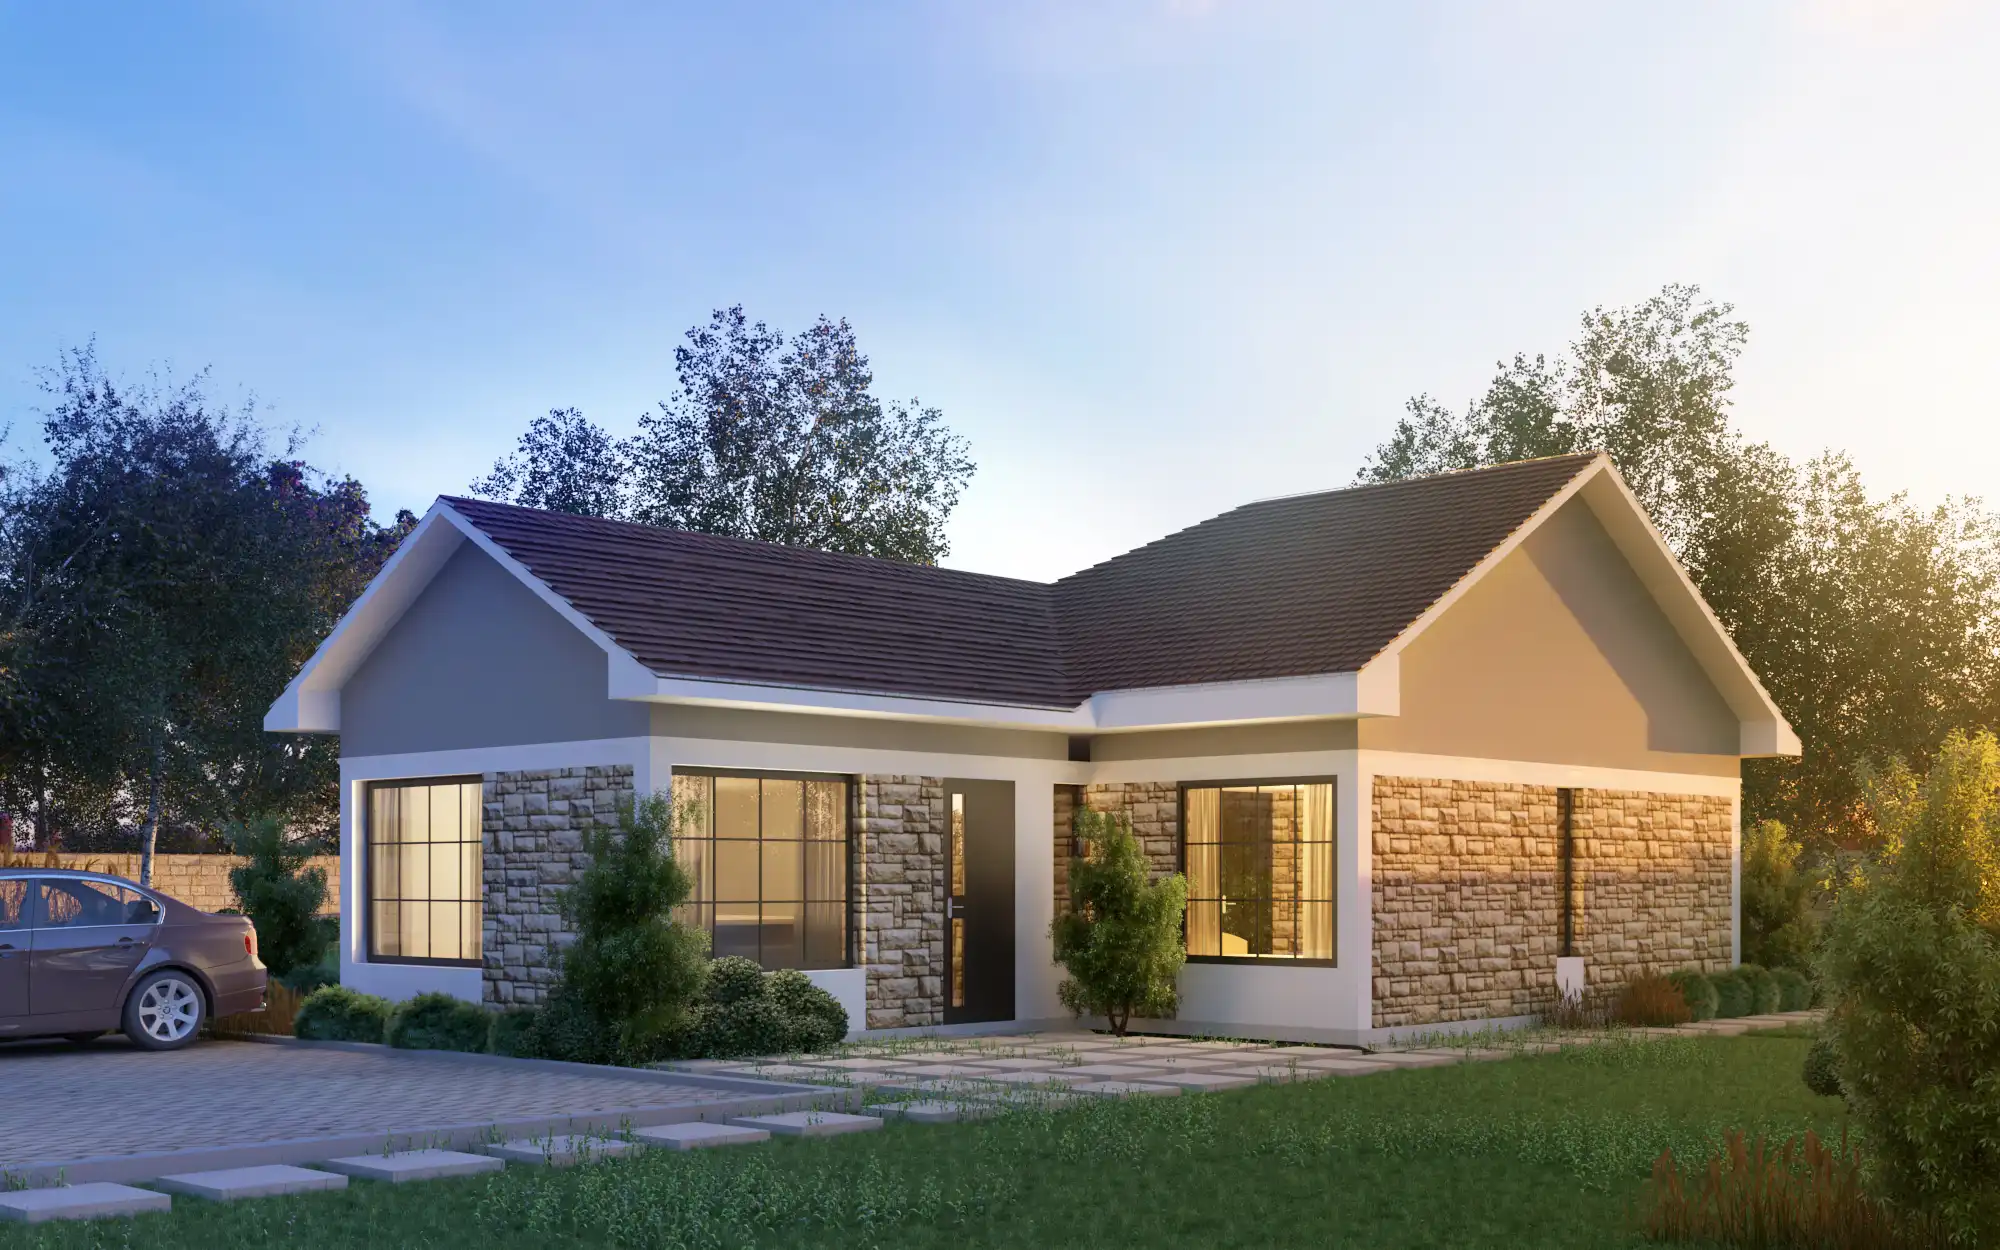 3 Bedroom Bungalow - ID 31171 - 31171.jpg from Inuua Tujenge house plans with 3 bedrooms and 2 bathrooms. ( bungalow )